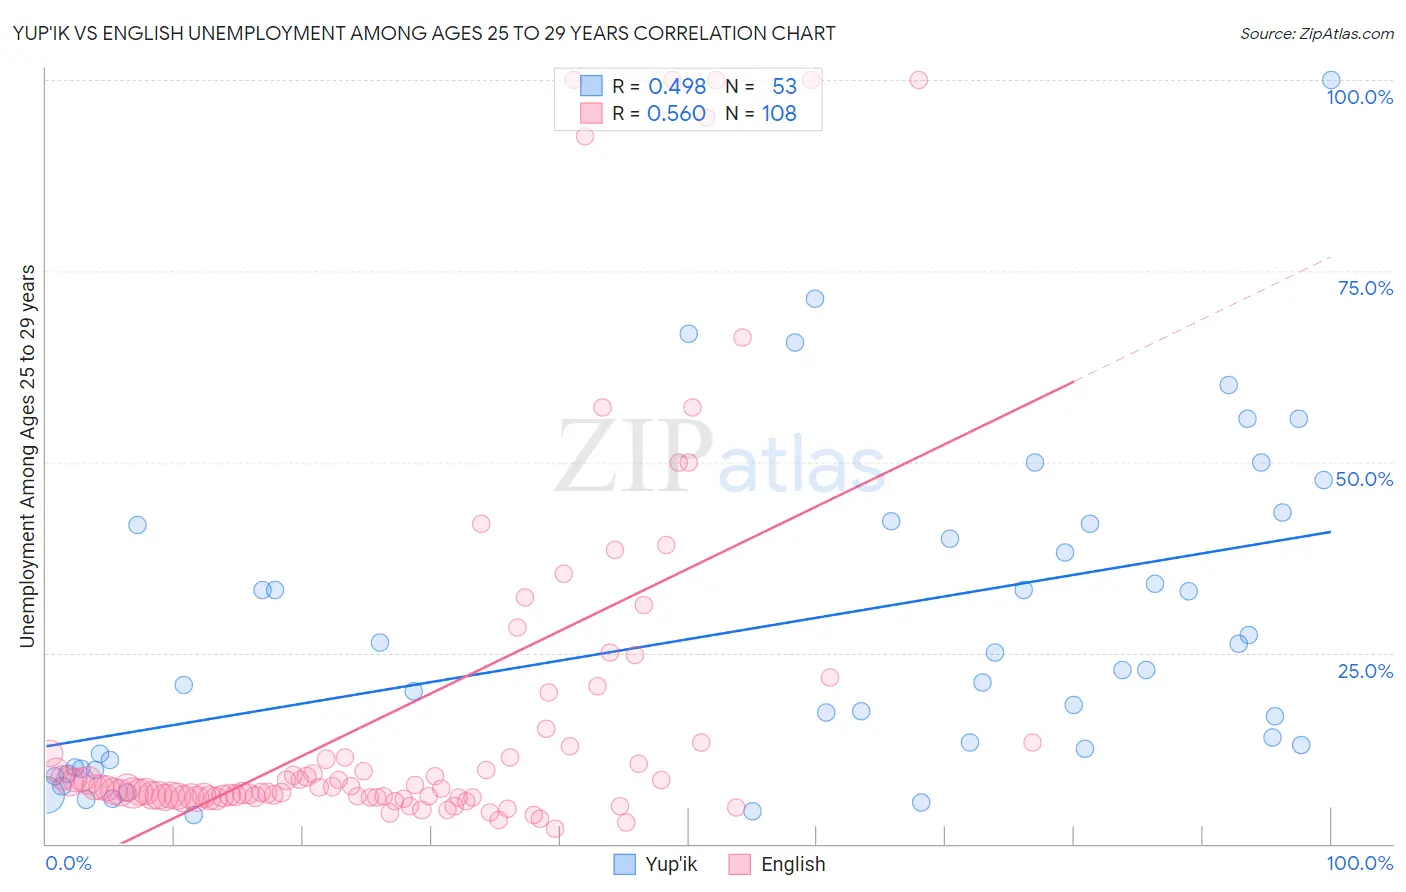 Yup'ik vs English Unemployment Among Ages 25 to 29 years